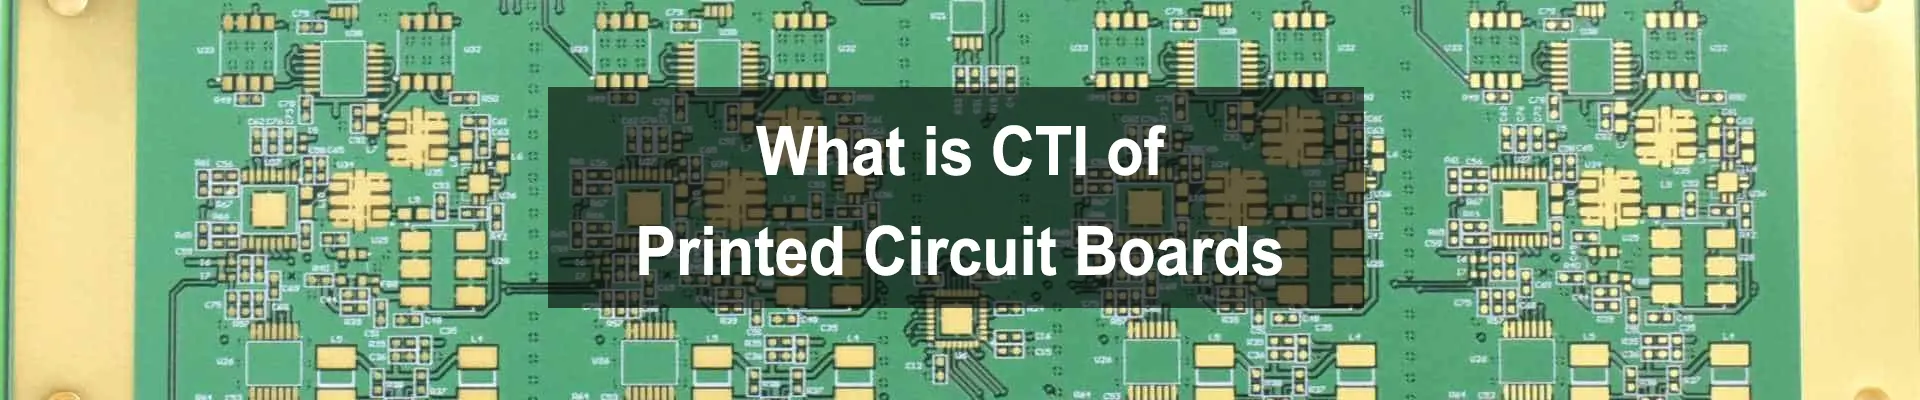 What is CTI of Printed Circuit Boards